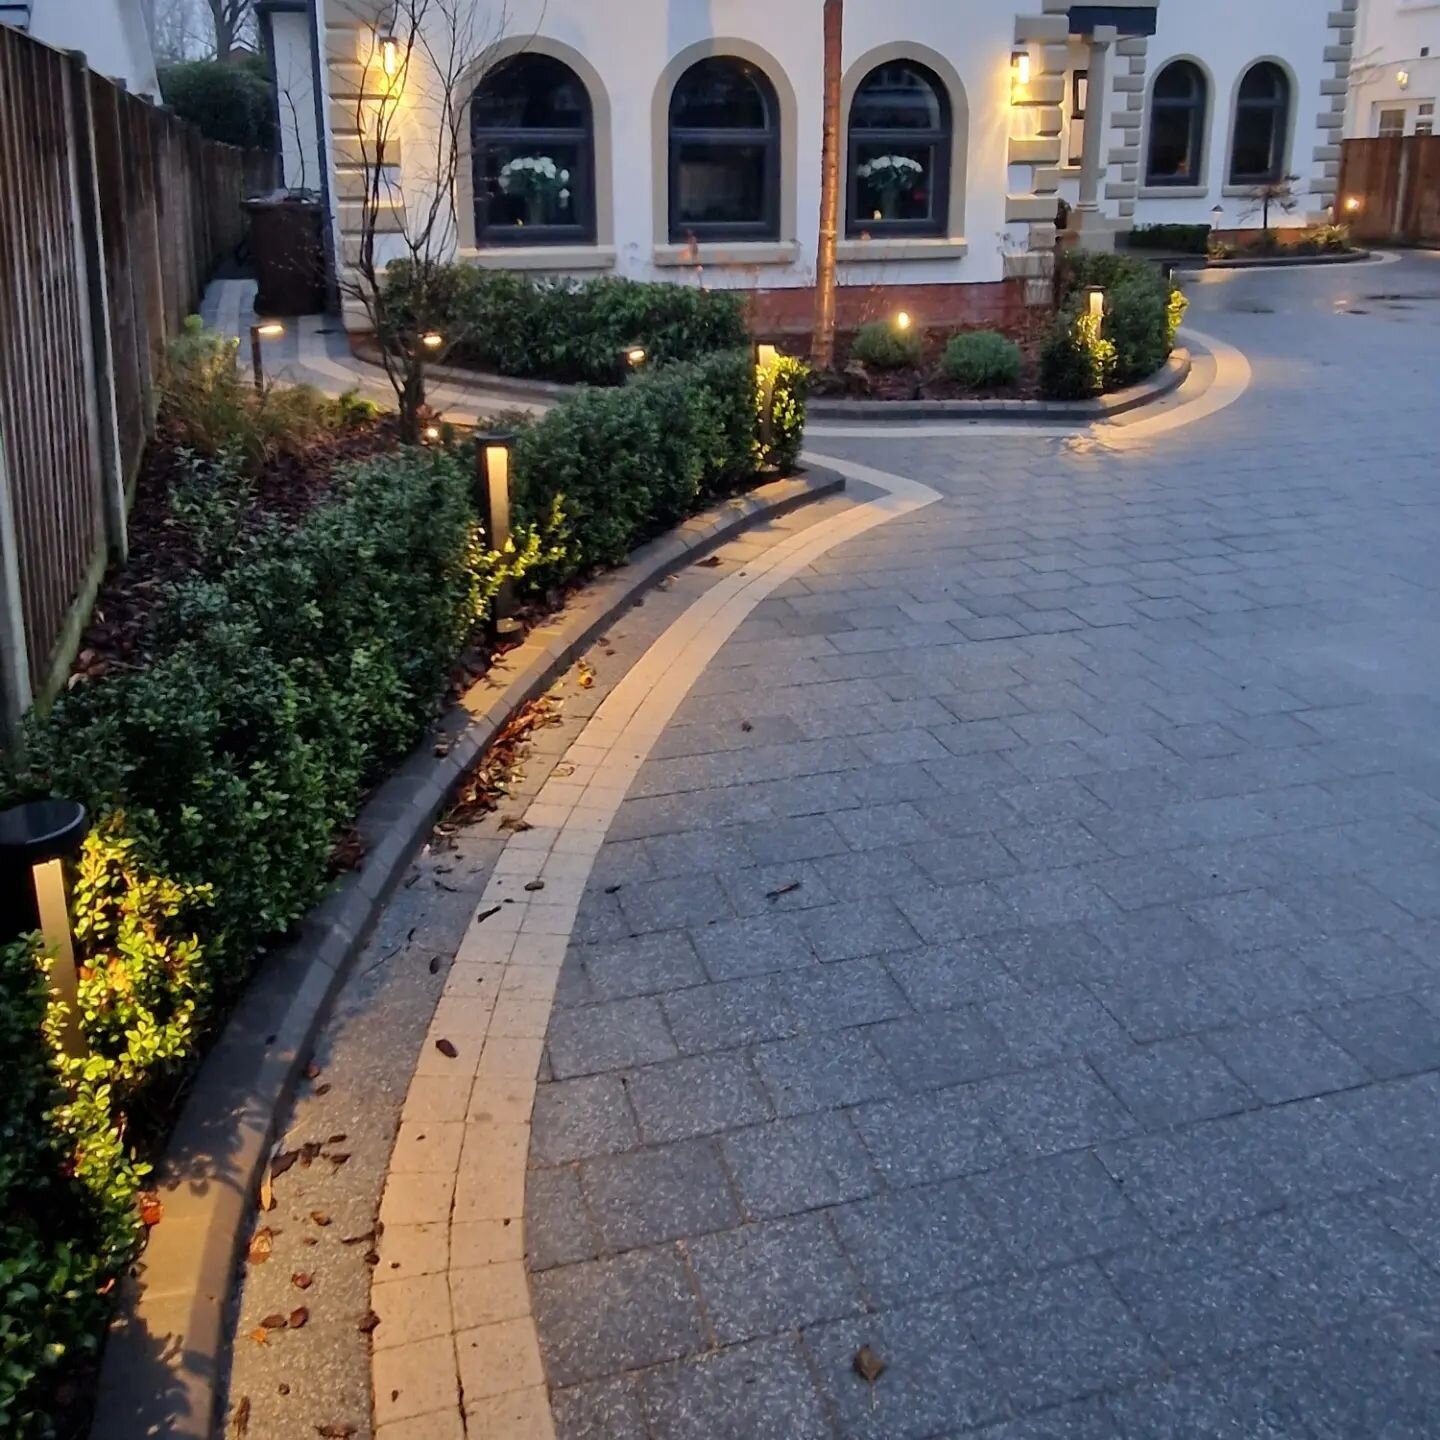 Some preview shots of another of our latest finish projects in Formby, Lancashire

The construction was carried out by there own builders, we were involved regarding the design, planting and lighting 

A real transformation from before and after with